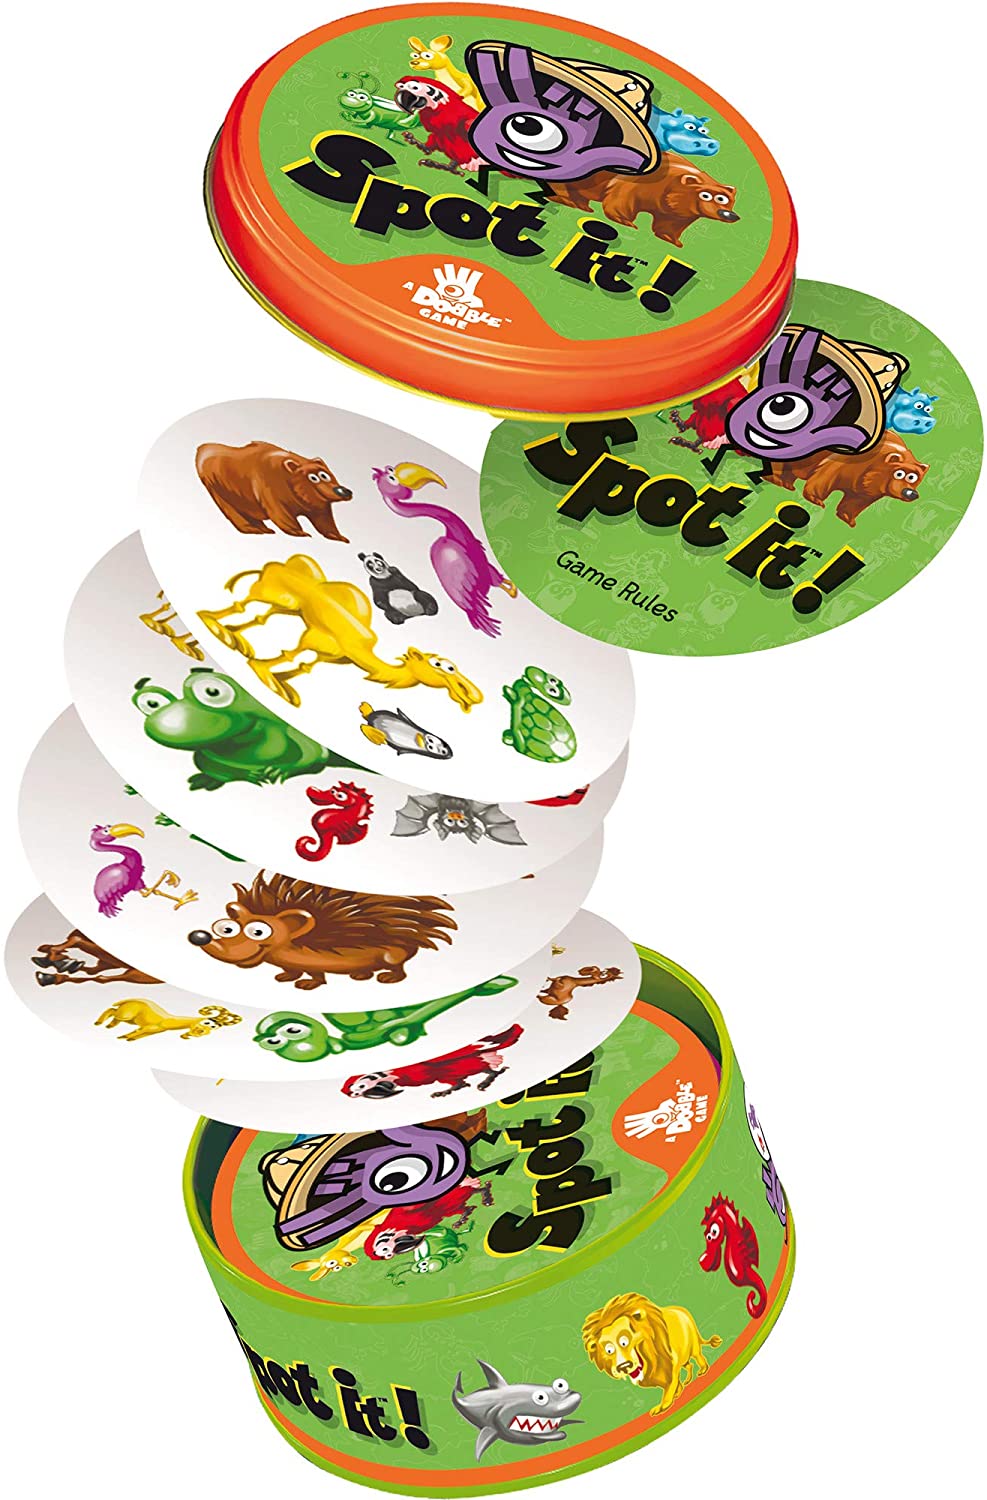 The Award-Winning Family Game Kids Party New Dobble Card Game Spot It 